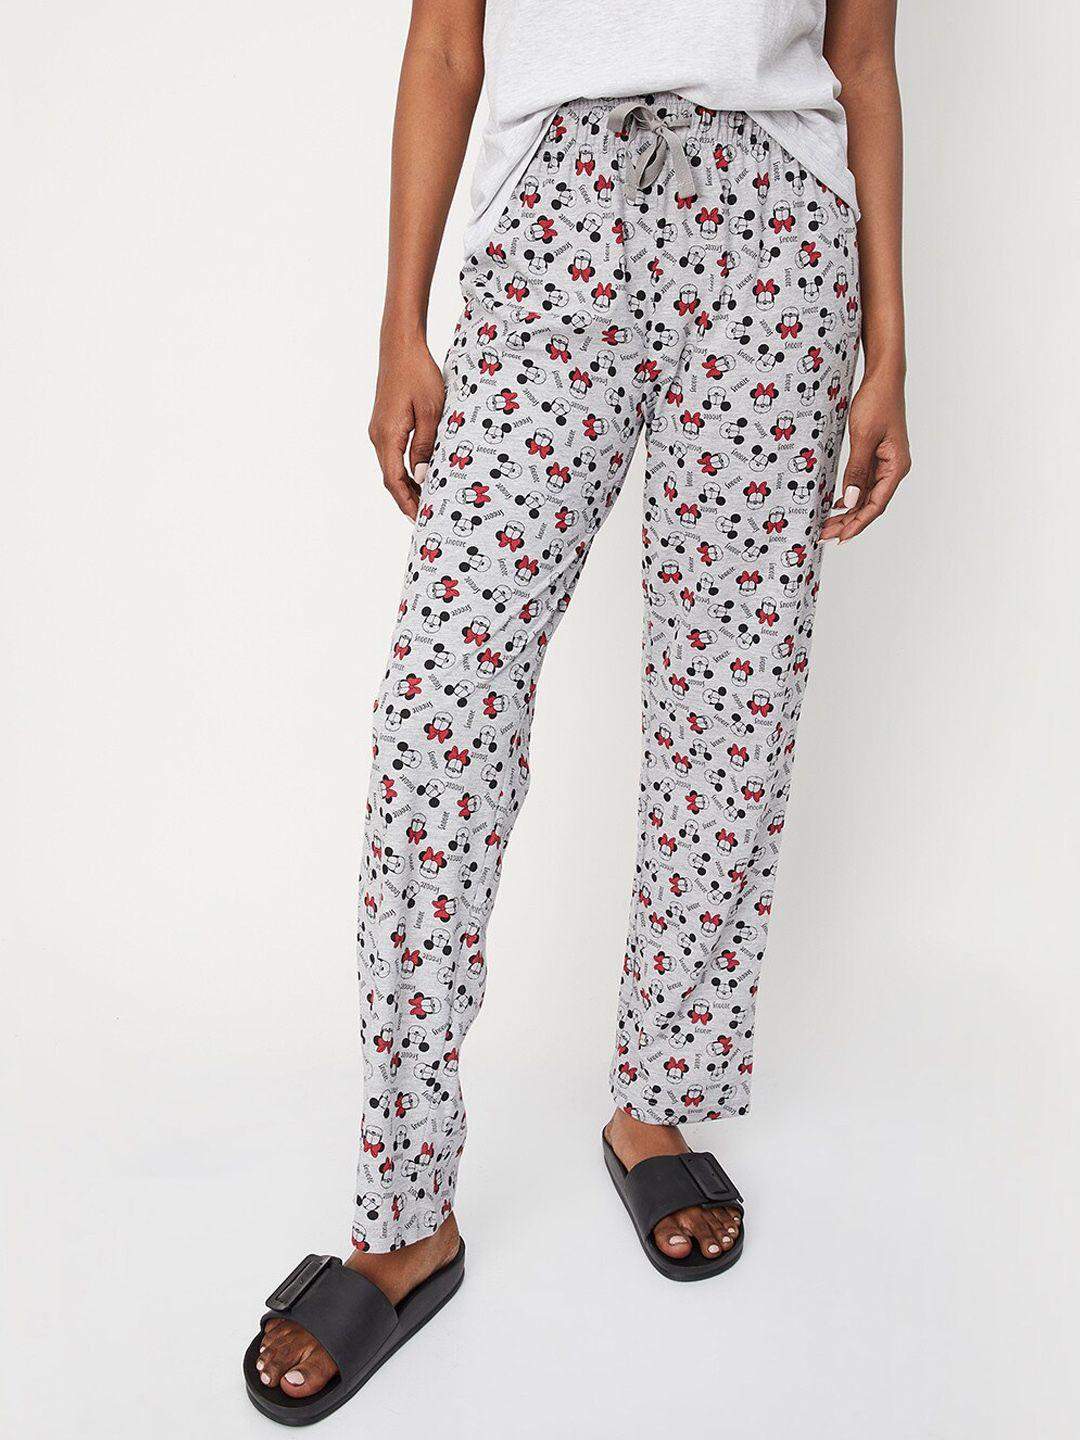 max-women-minnie-mouse-printed-knit-lounge-pants